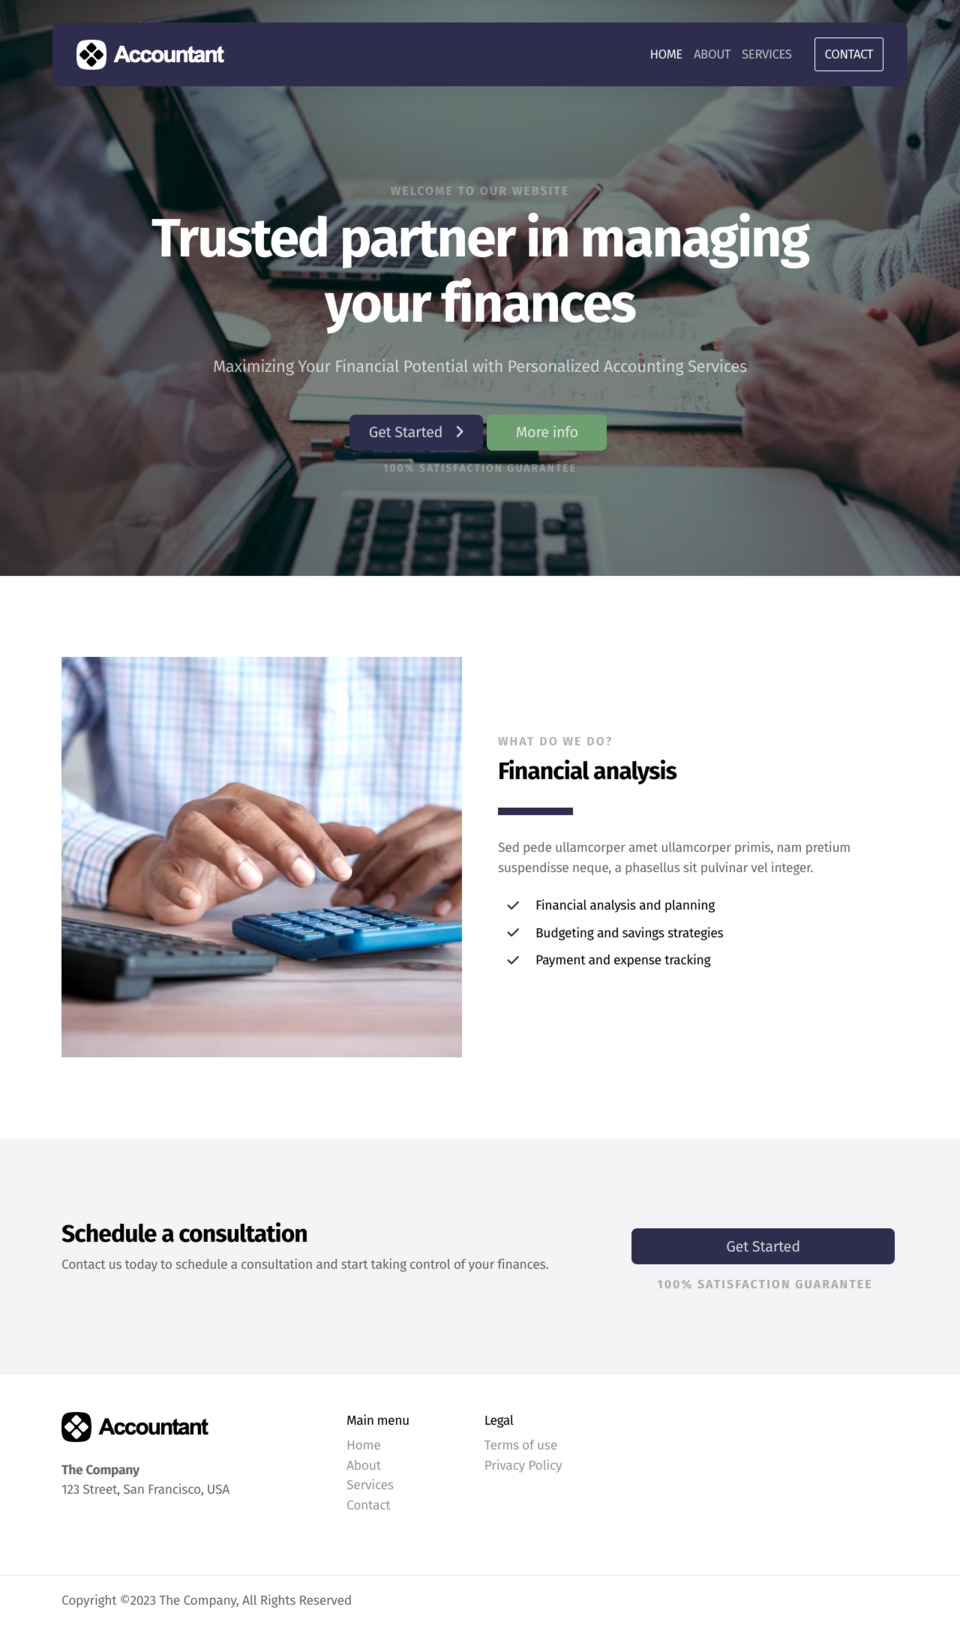 Accountant Website Template - Ideal for accounting professionals, bookkeepers, financial service providers, CPAs, CFOs, and small business owners looking to showcase their financial services online.